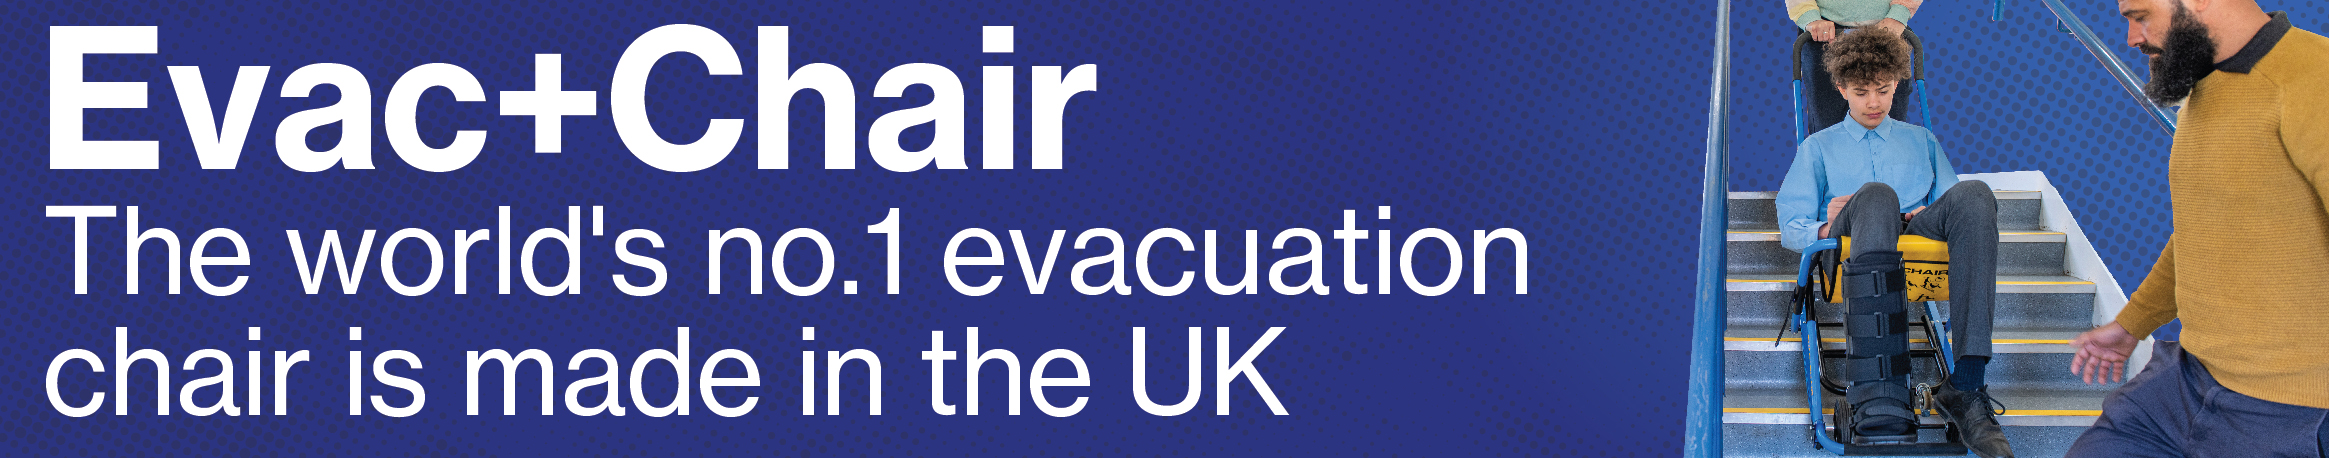 evac+chair world's number one evacuation chair made in the UK